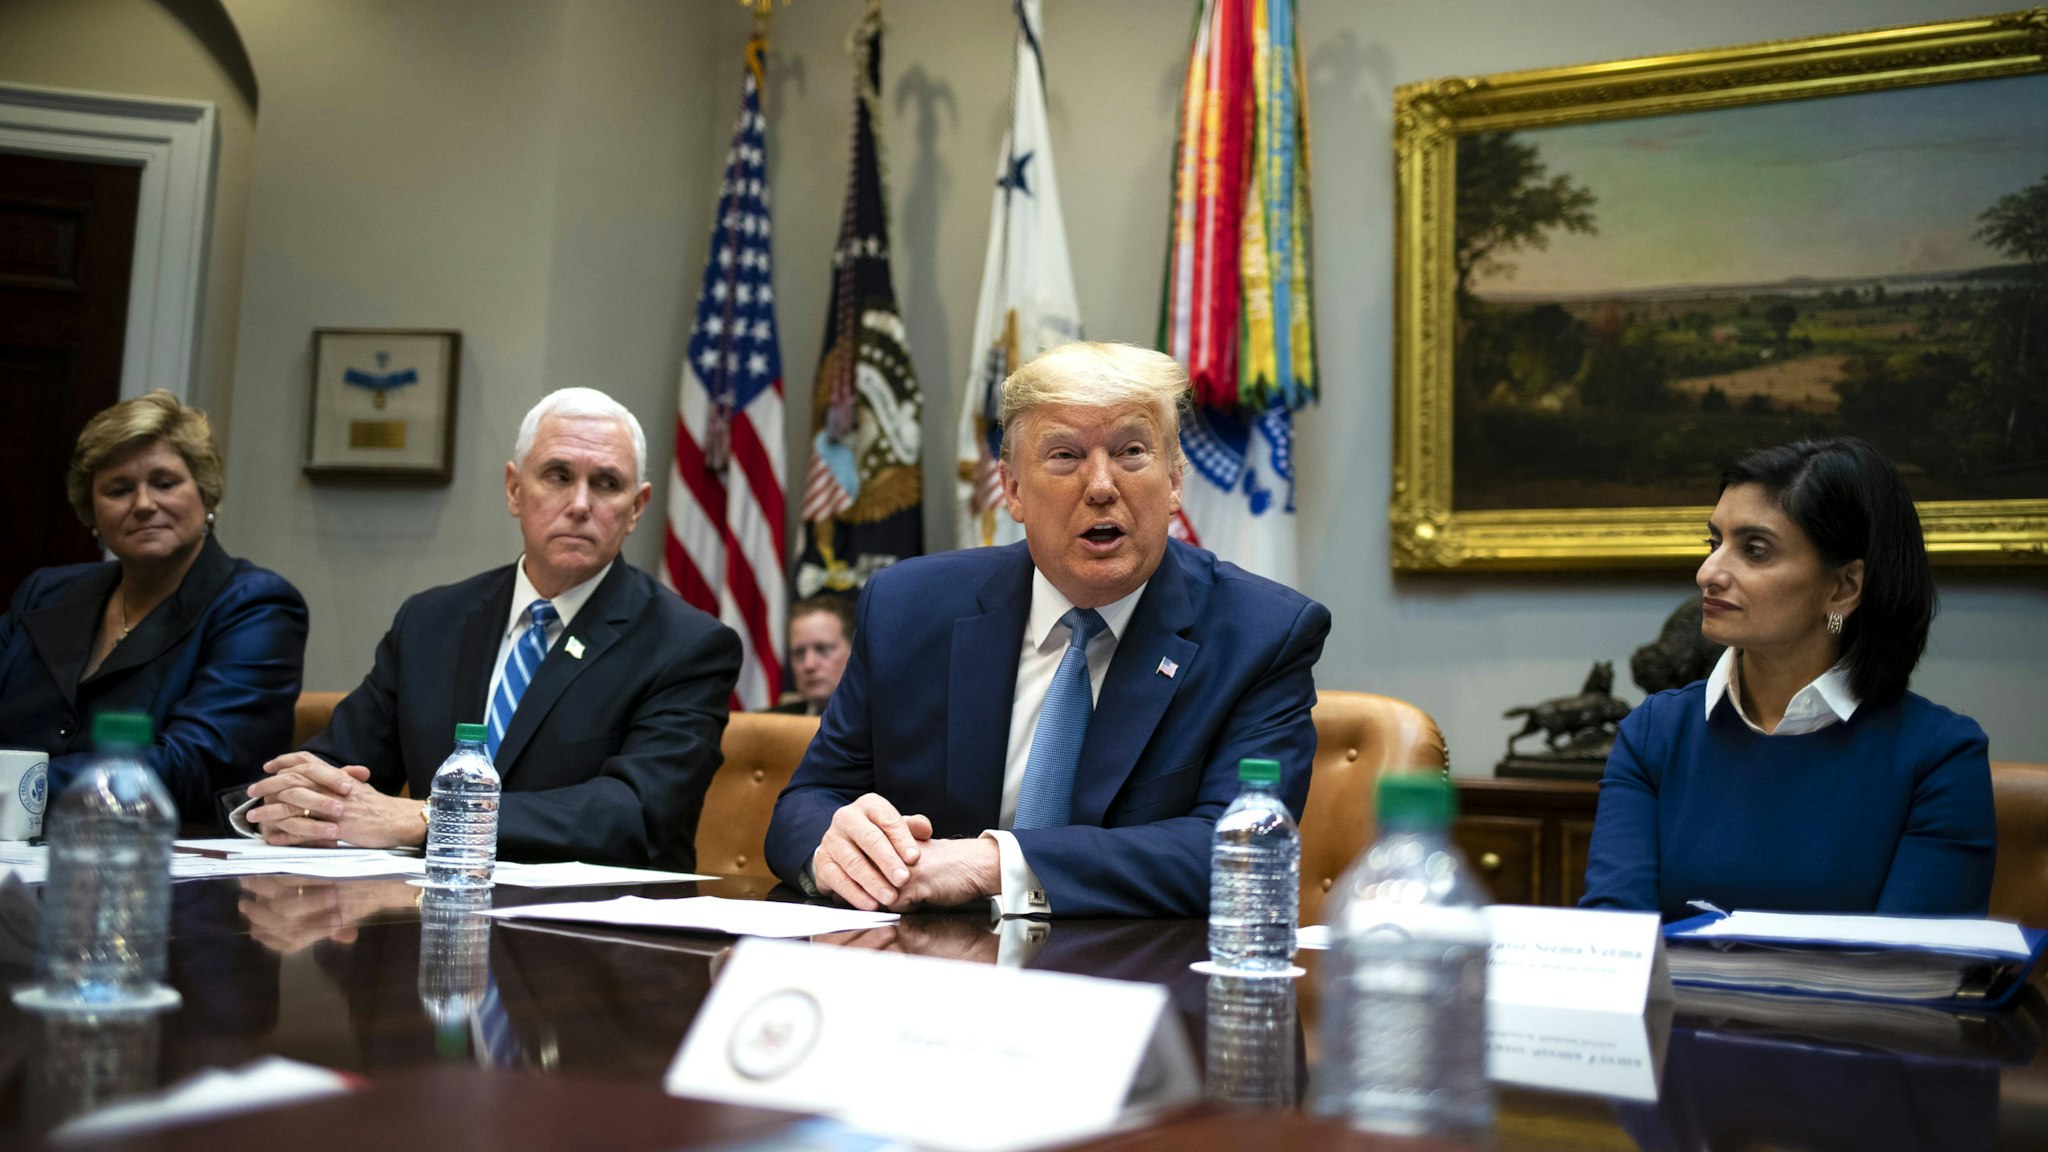 U.S. President Donald Trump, center, speaks while Gail Boudreaux, president and chief executive officer of Anthem Inc., from left, Vice President Mike Pence, and Seema Verma, administrator of the Centers for Medicare and Medicaid Services, listen during a coronavirus briefing with health insurers in the Roosevelt Room of the White House in Washington, D.C., U.S., on Tuesday, March 10, 2020. The window for fully containing the coronavirus has passed in some parts of the U.S. and the White House will roll out plans later Tuesday to mitigate its impact.